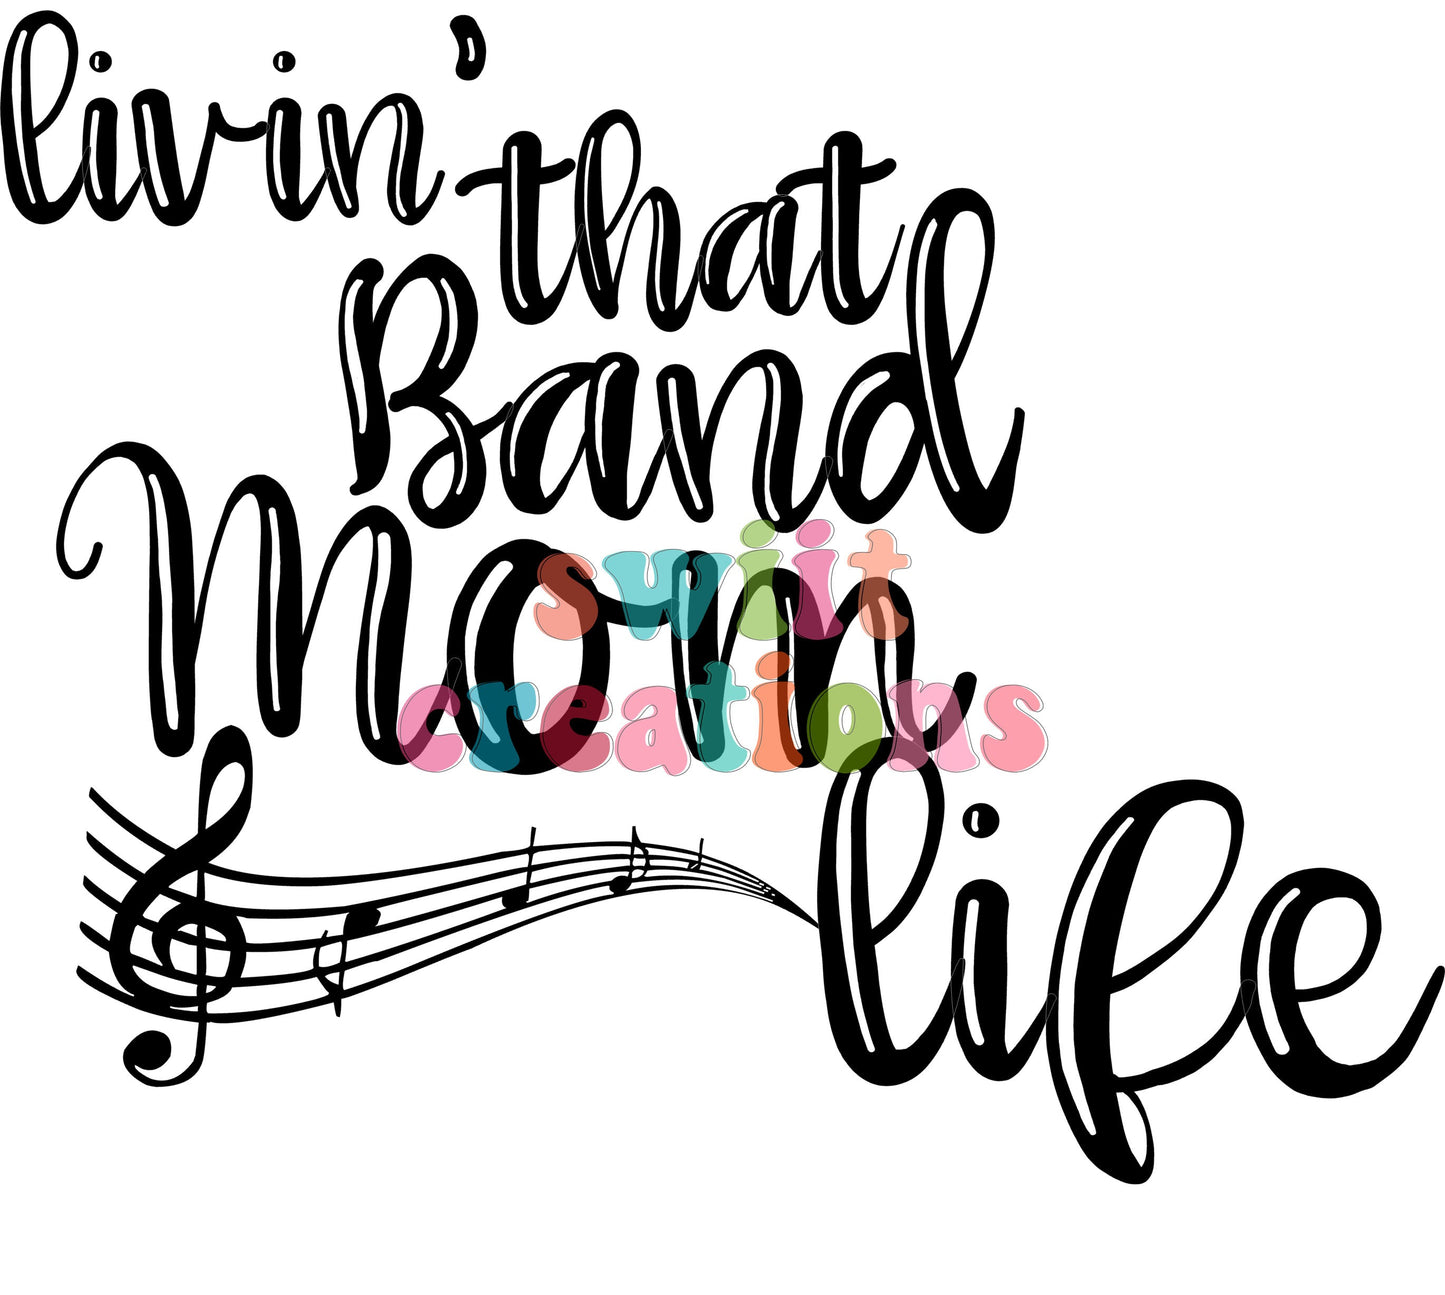 Band Mom Large Canvas Tote